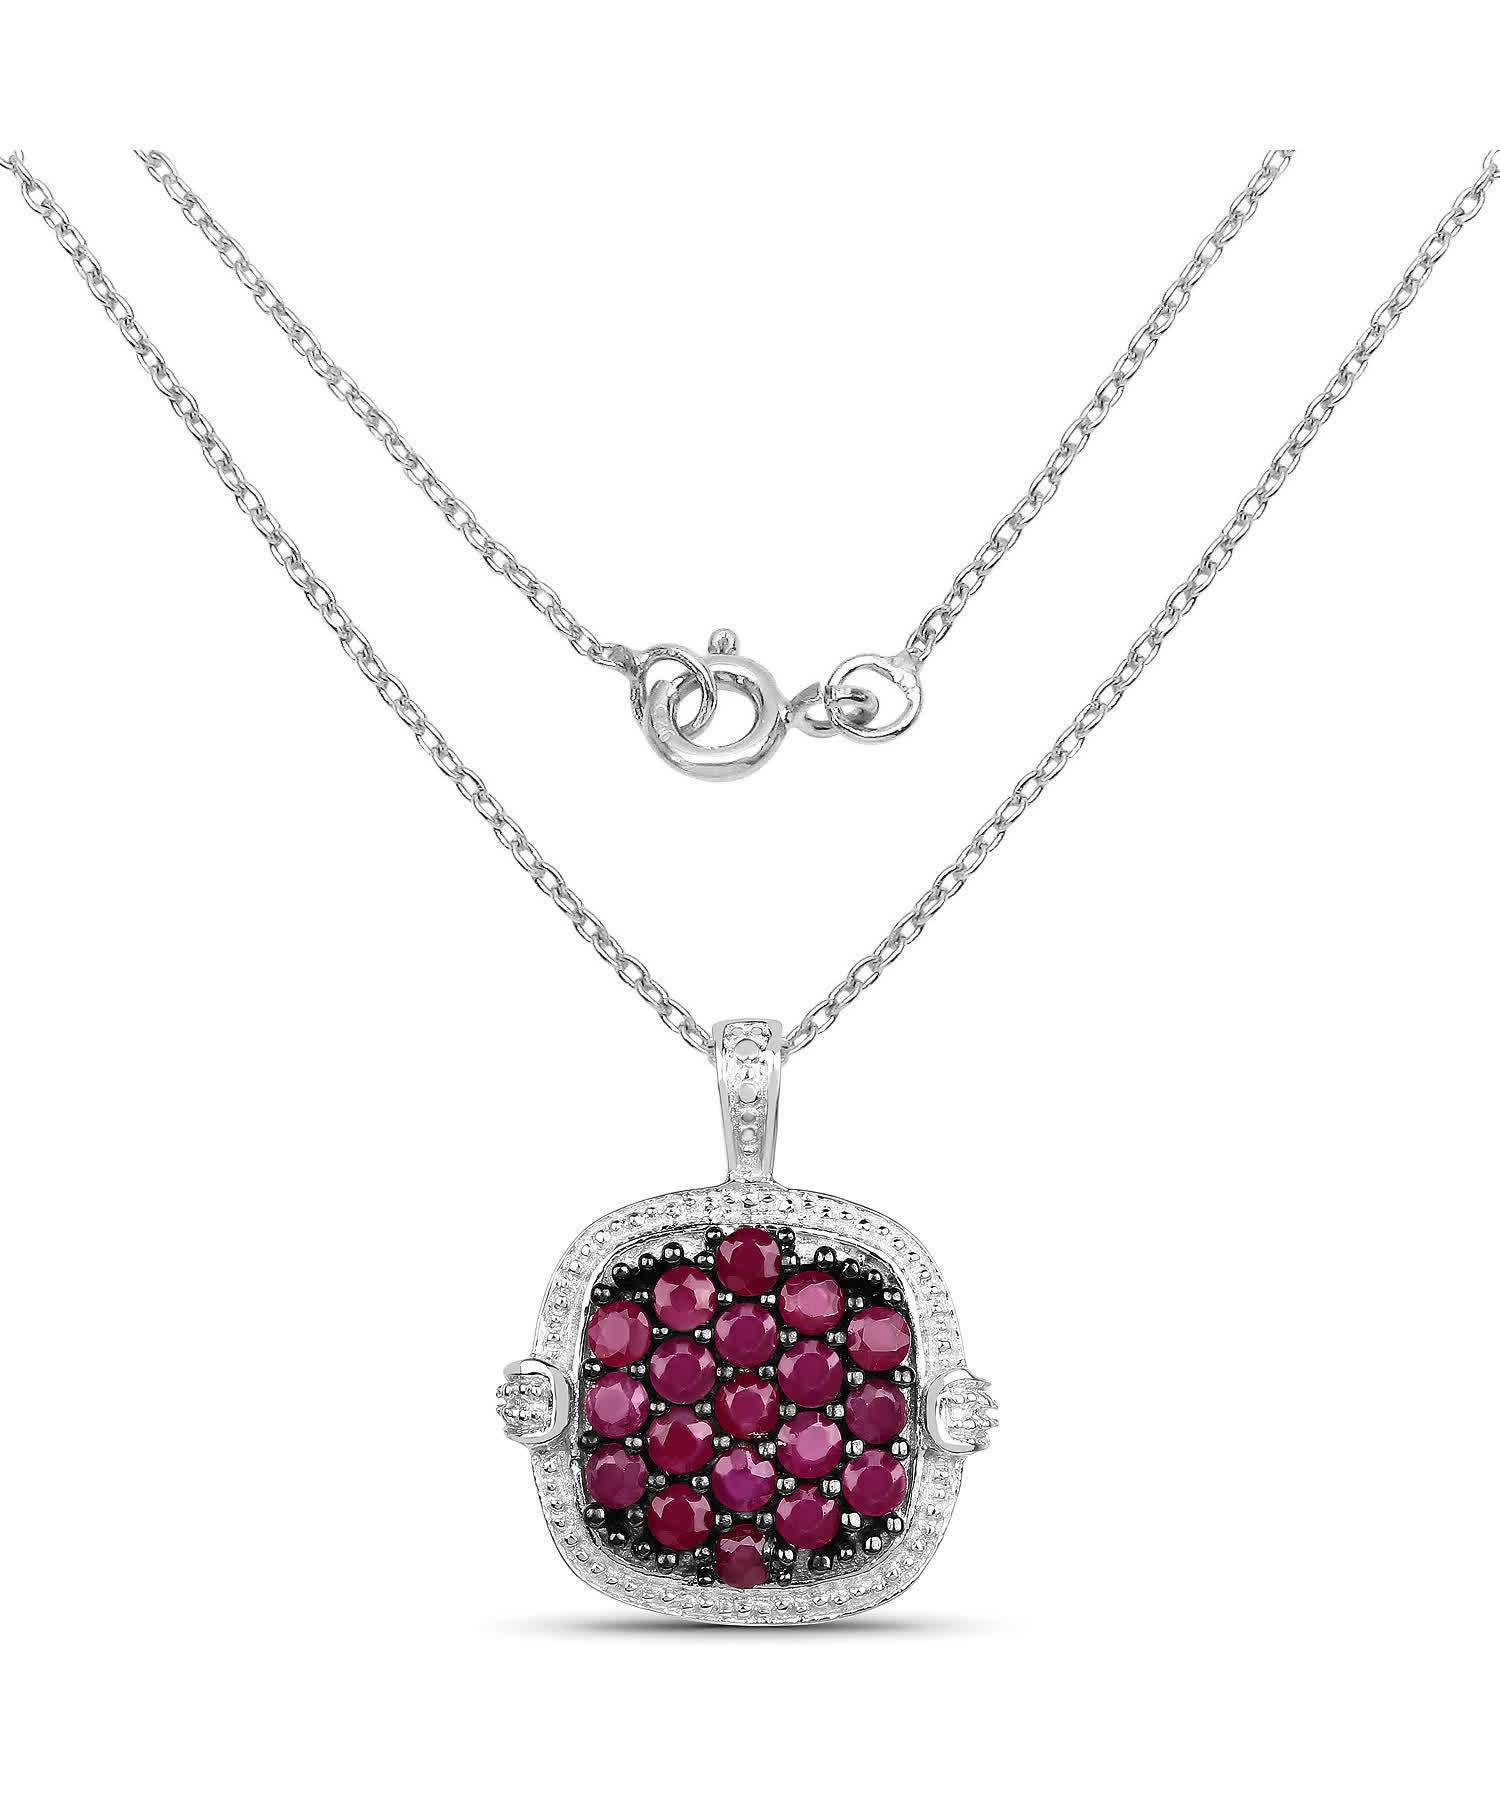 1.43ctw Natural Ruby Rhodium Plated 925 Sterling Silver Pendant With Chain View 2